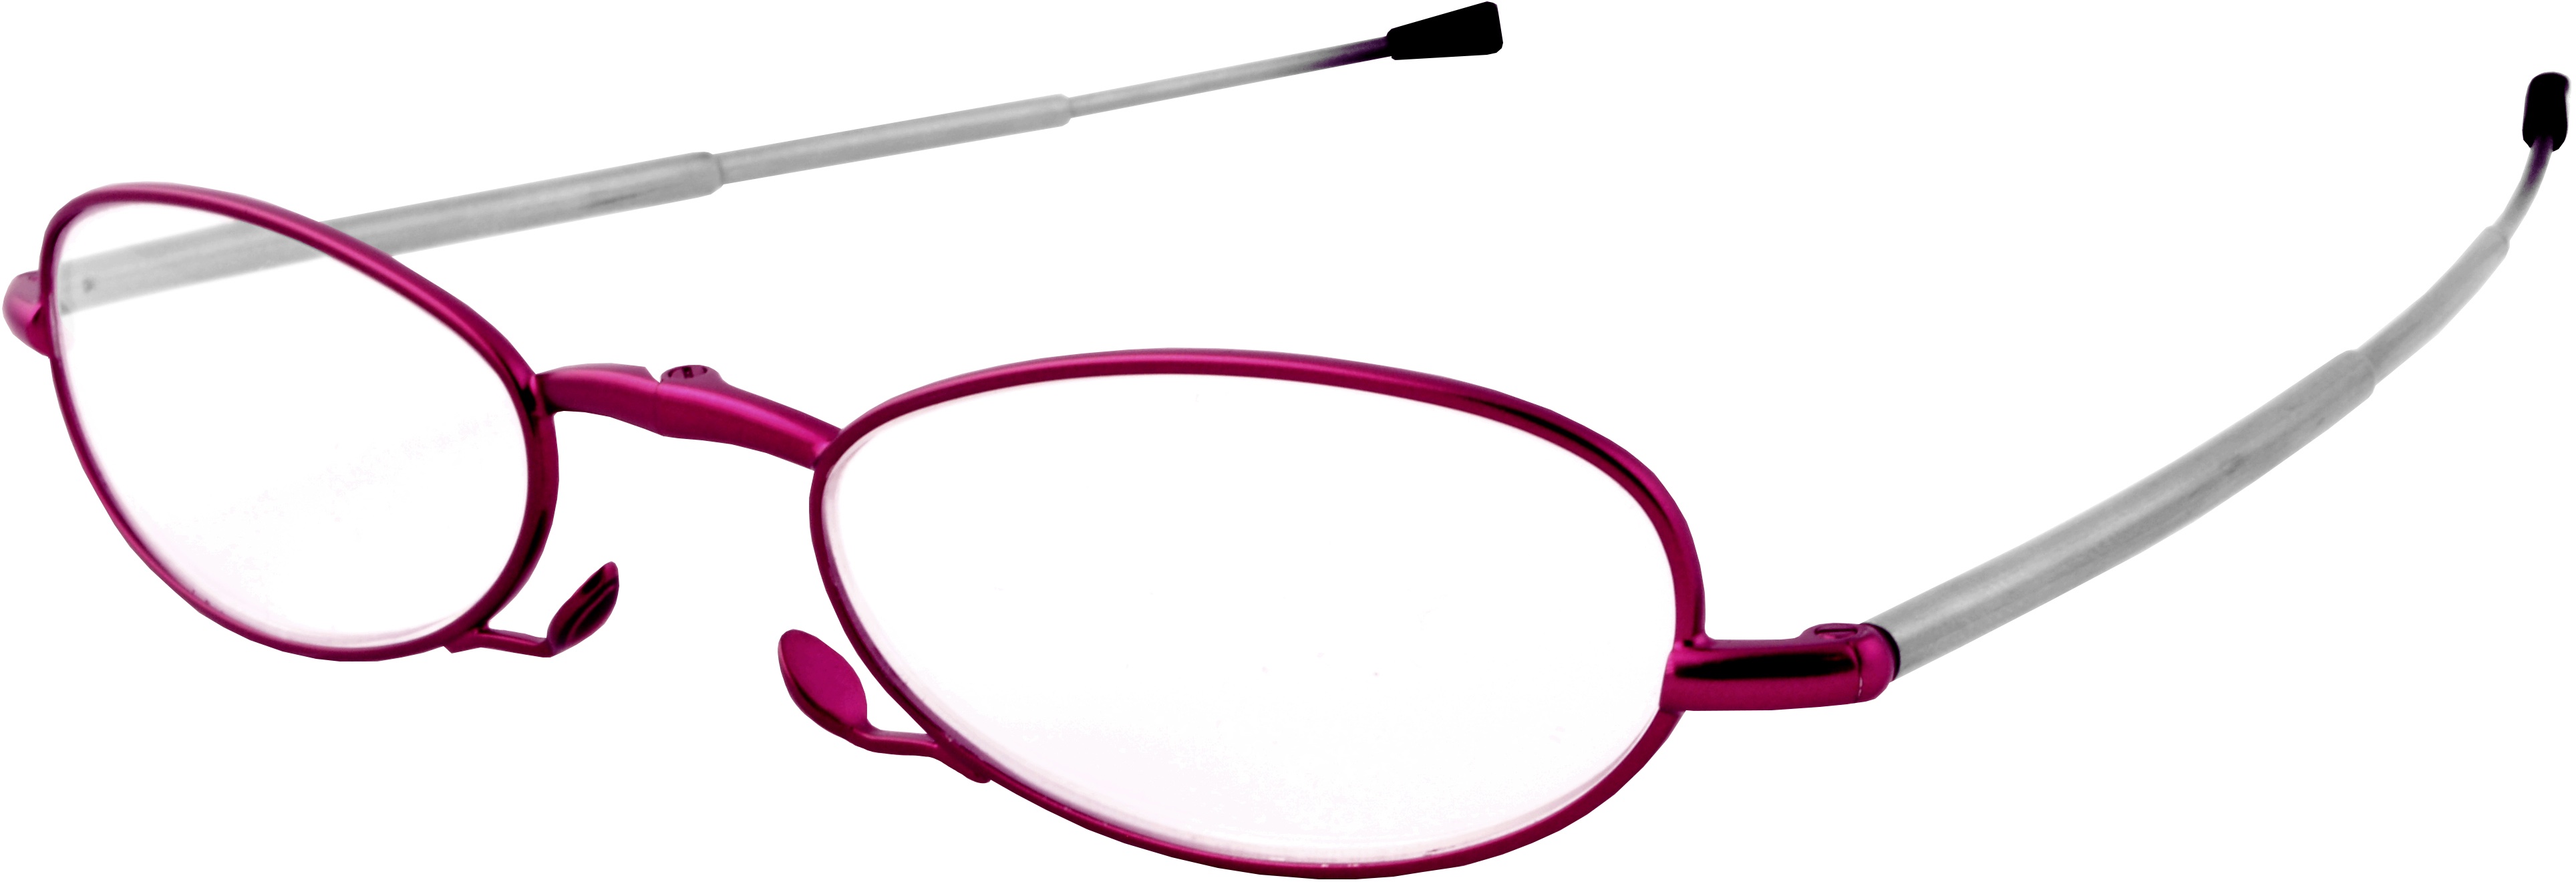 Women's Rectangle Reading Glasses In Pink By Foster Grant - Gideon Glimmer - +1.50